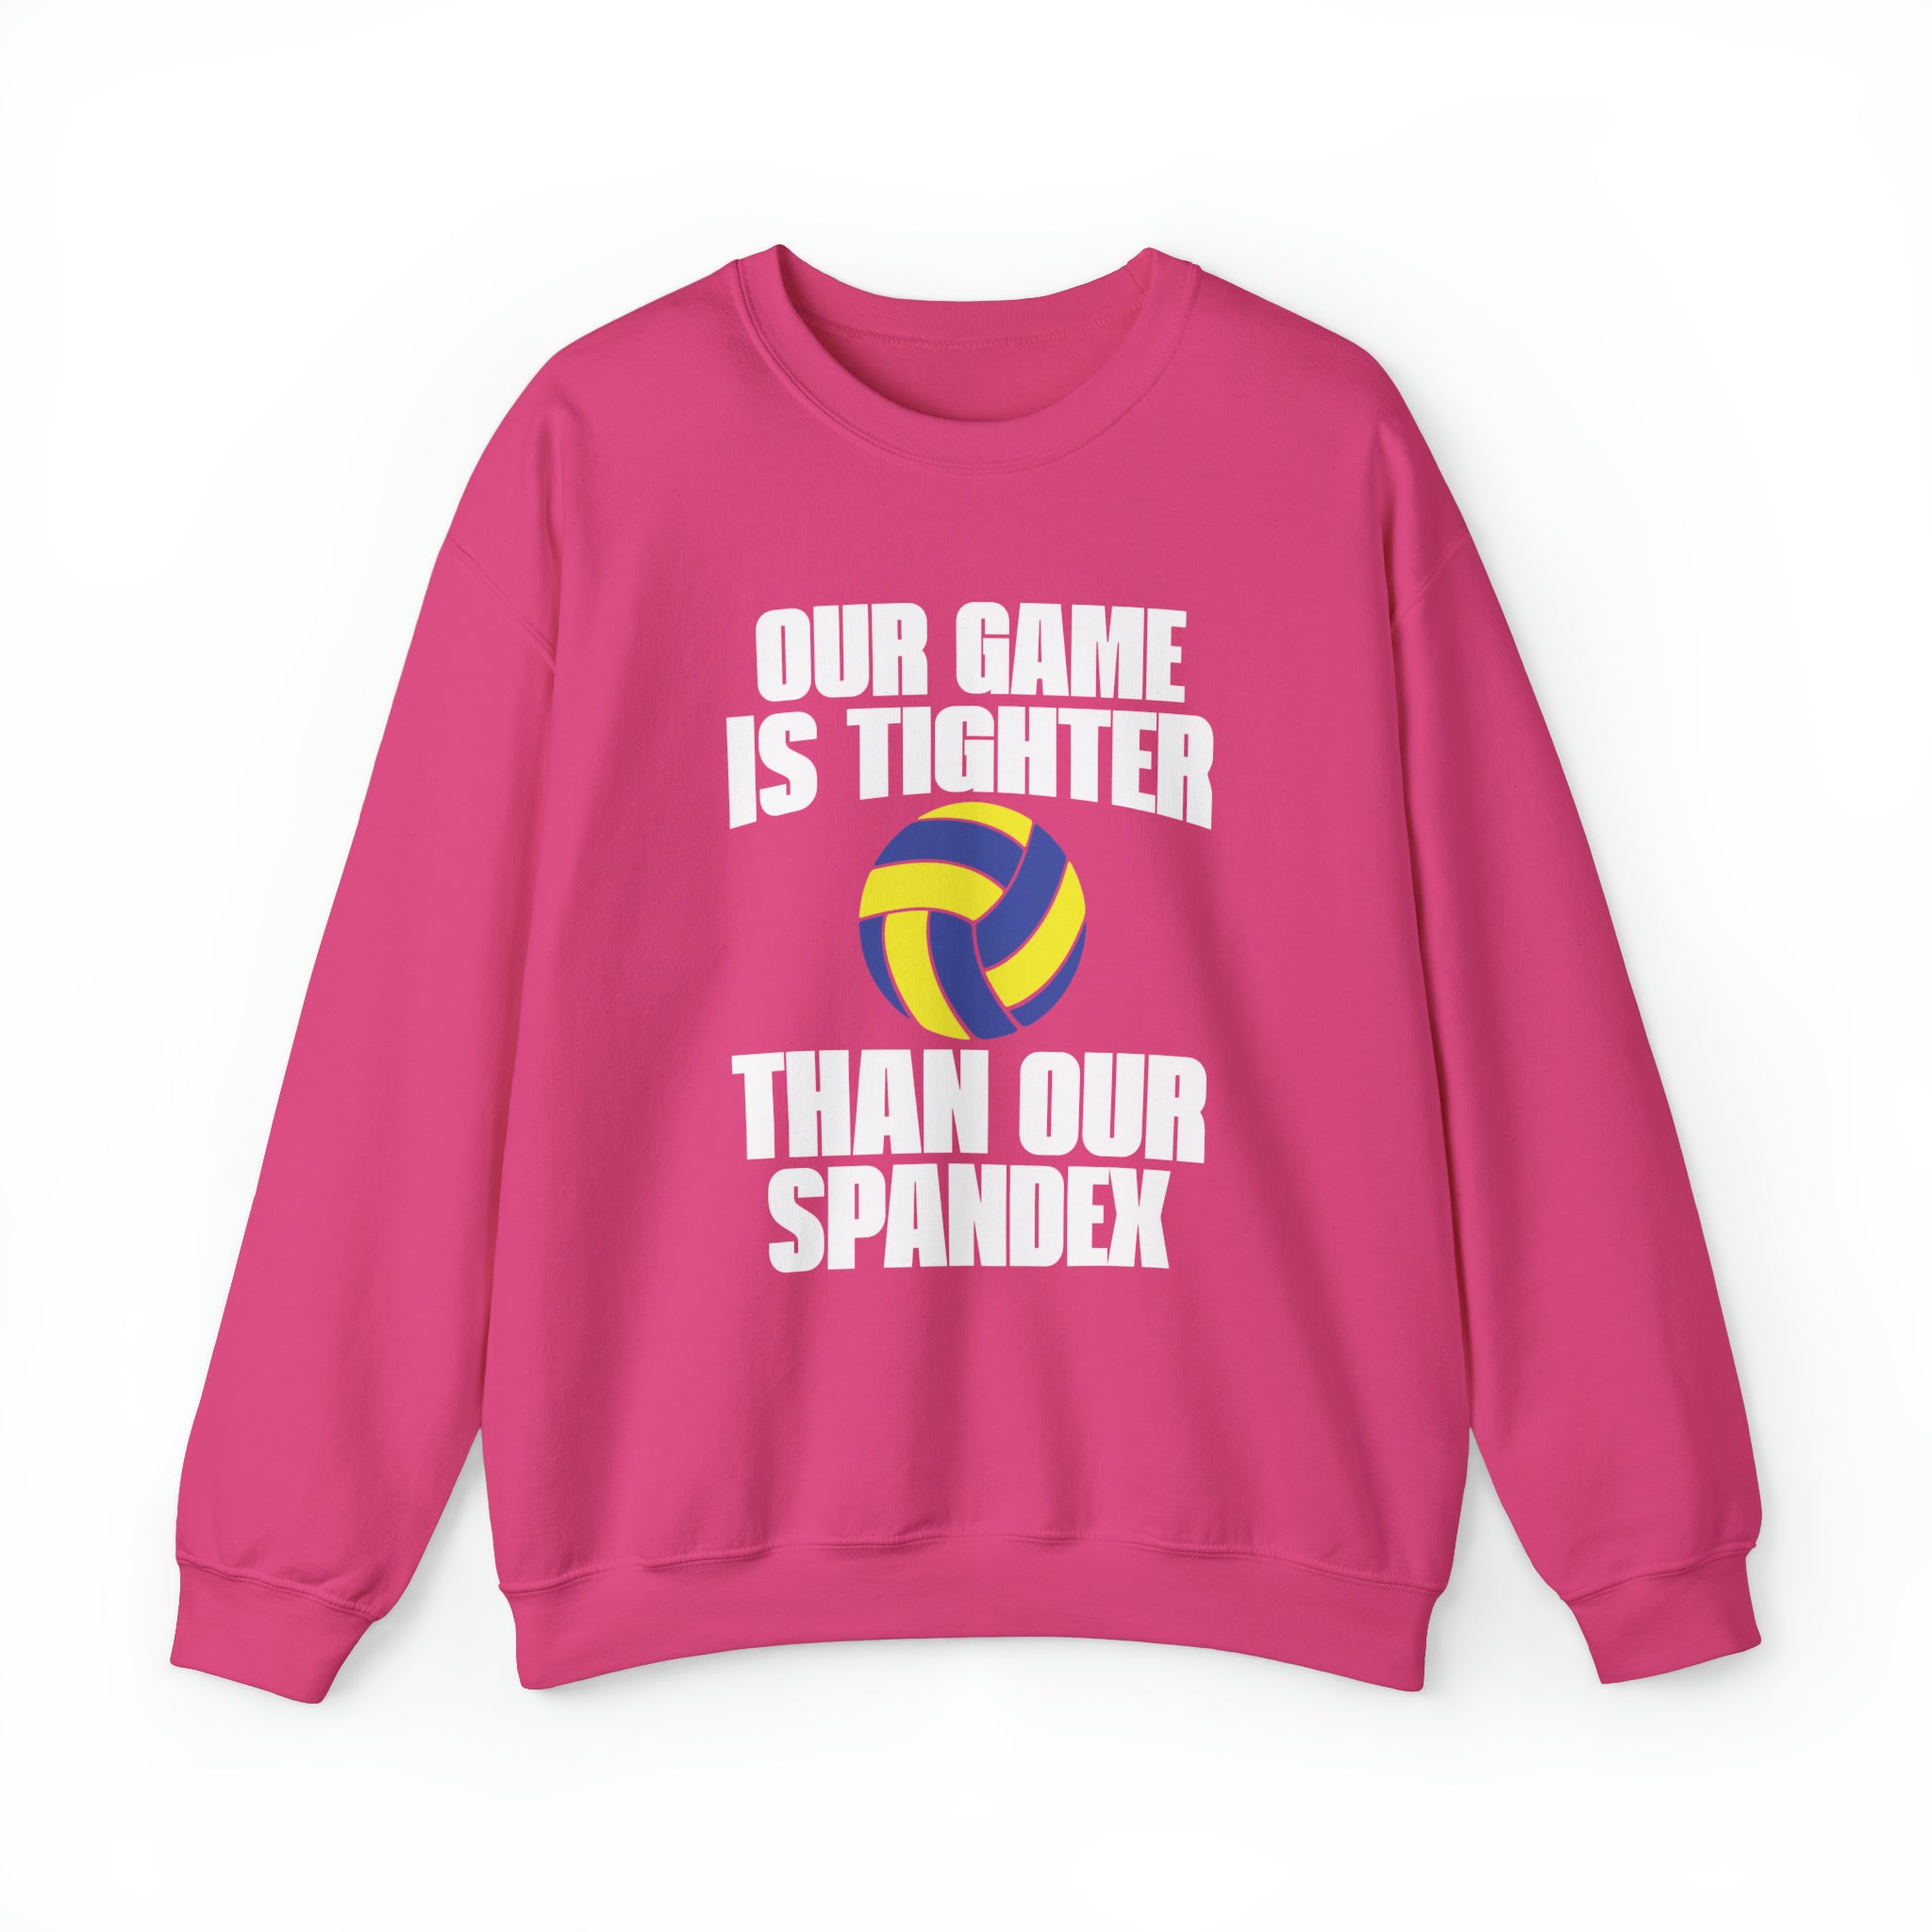 Our Game Is Tighter Than our Spandex Sweatshirt